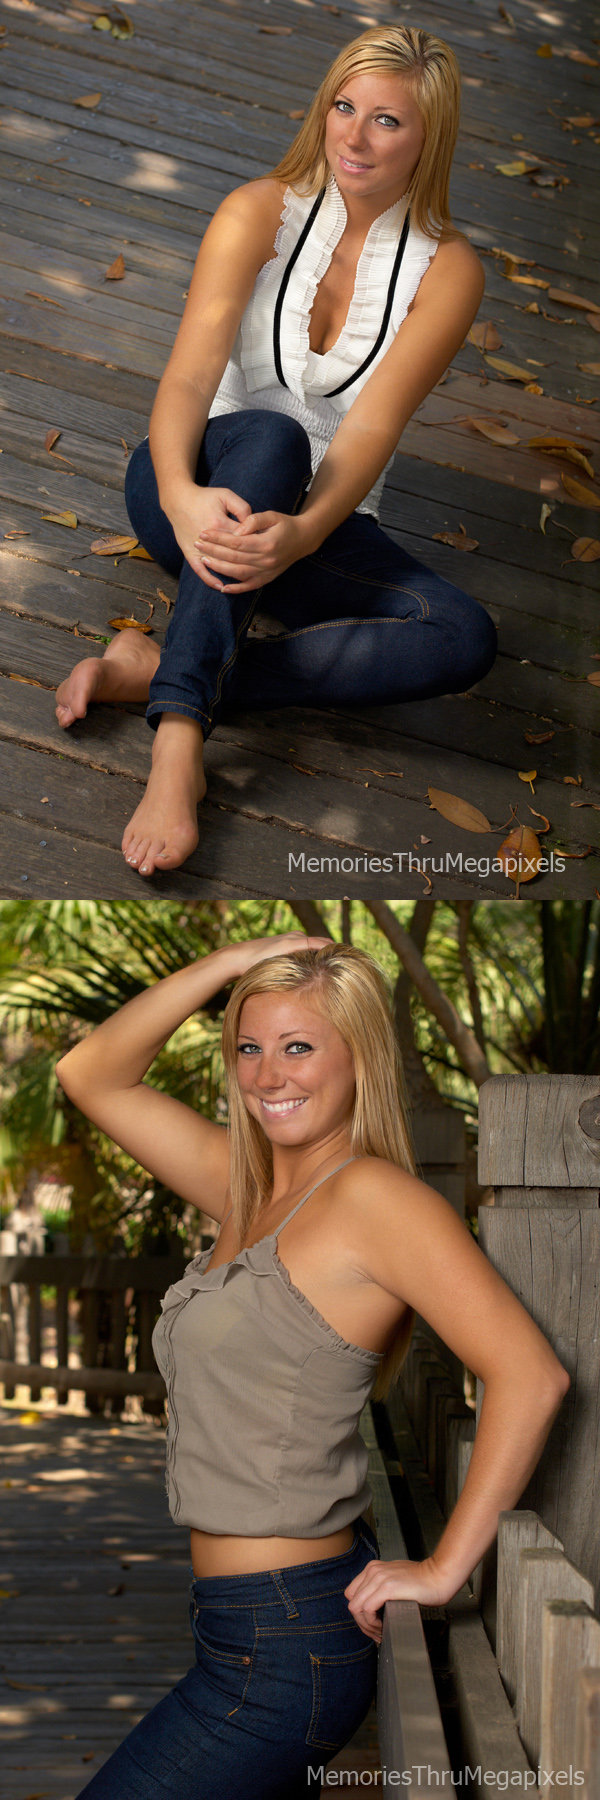 Male and Female model photo shoot of MemoriesThruMegapixels and Lorraine Catalusci by MemoriesThruMegapixels